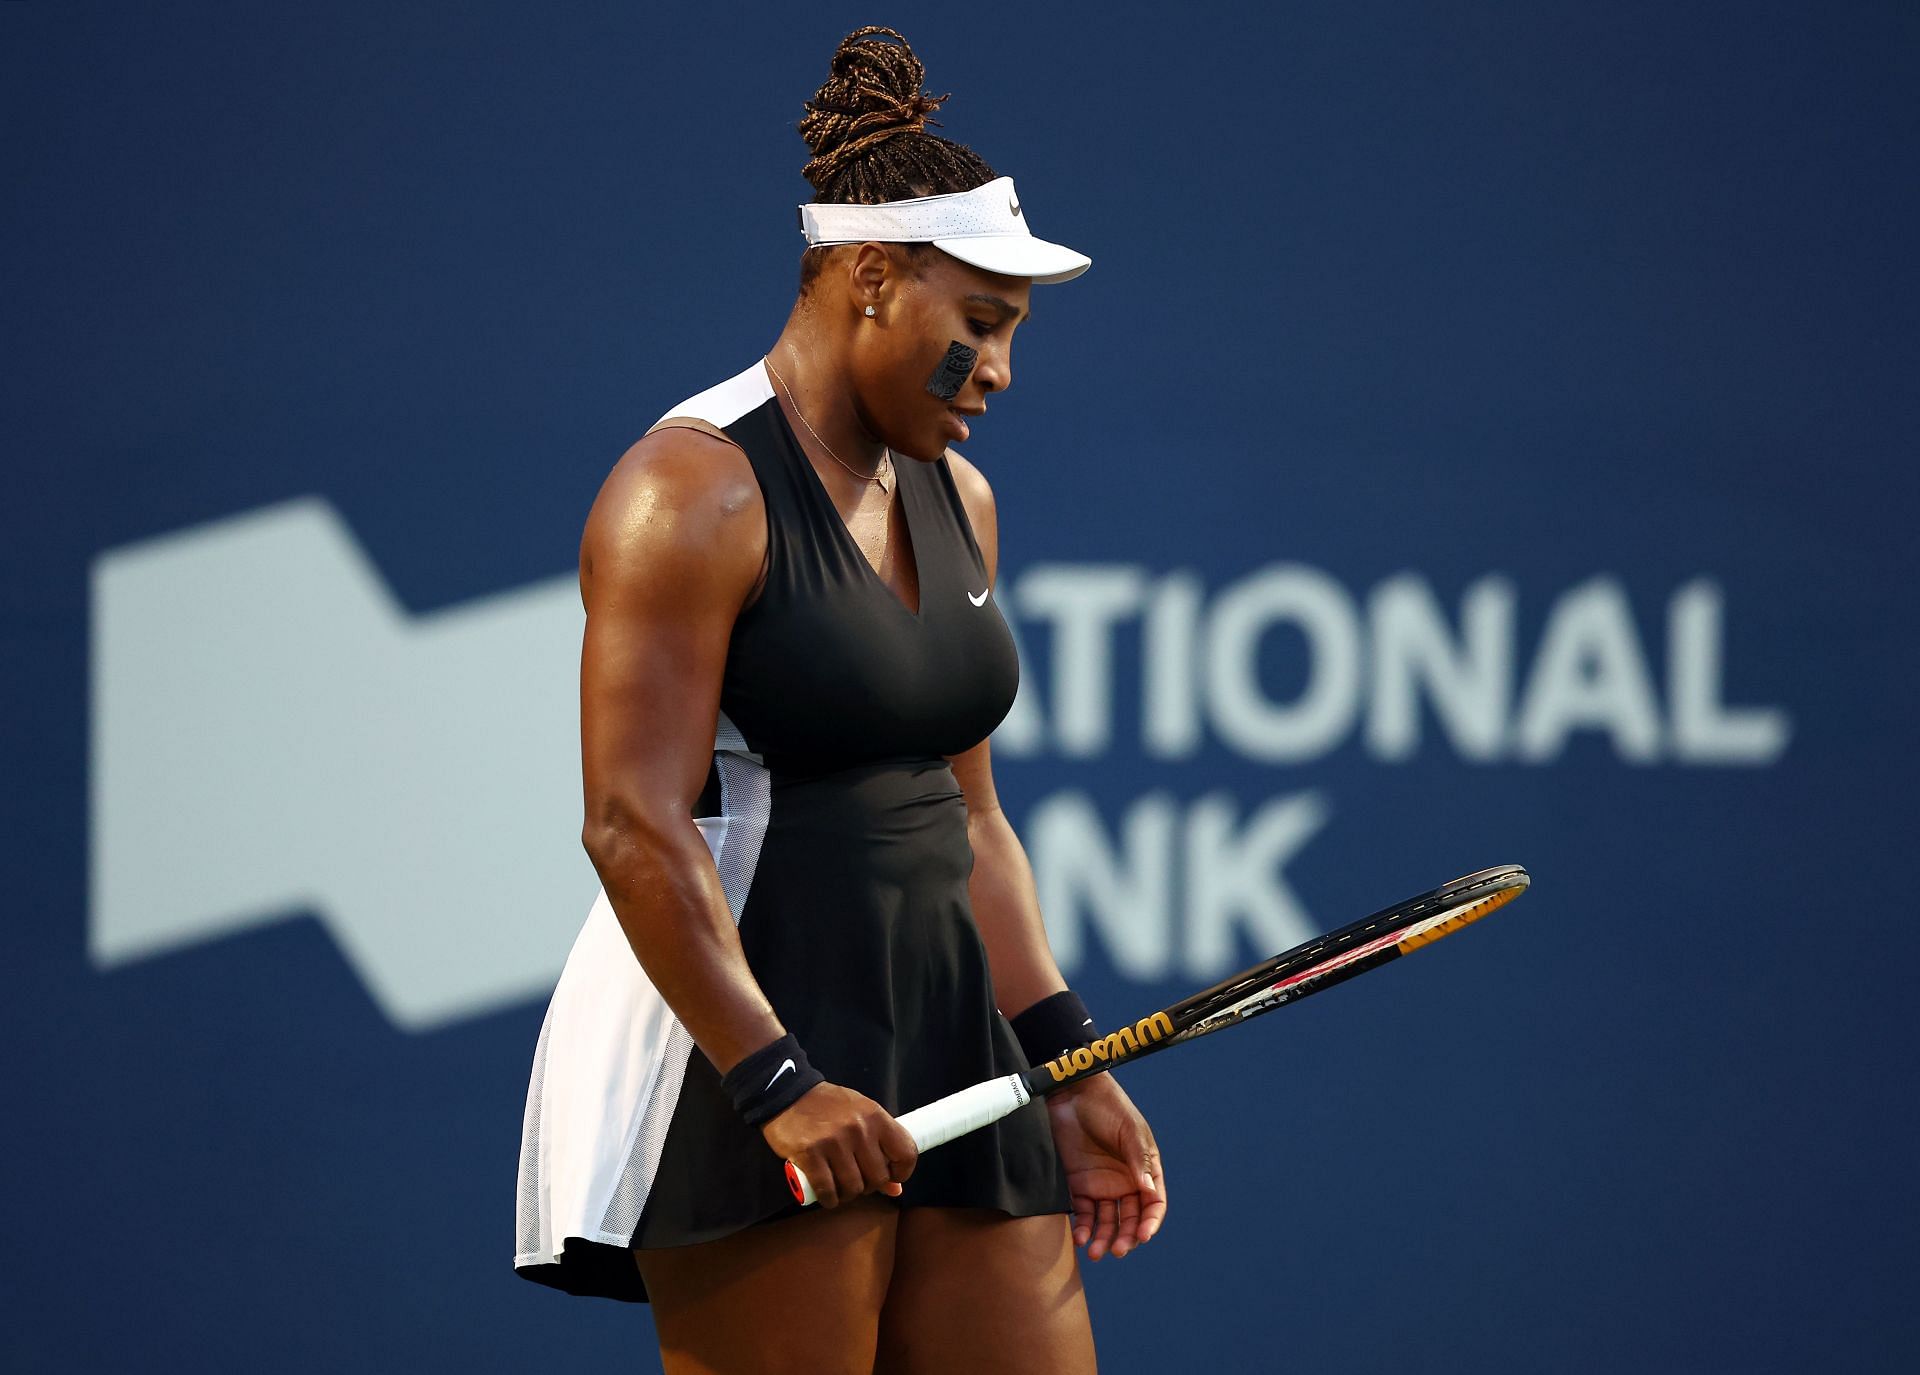 Serena Williams of the United States looks at her racket at the National Bank Open Toronto - Day 5